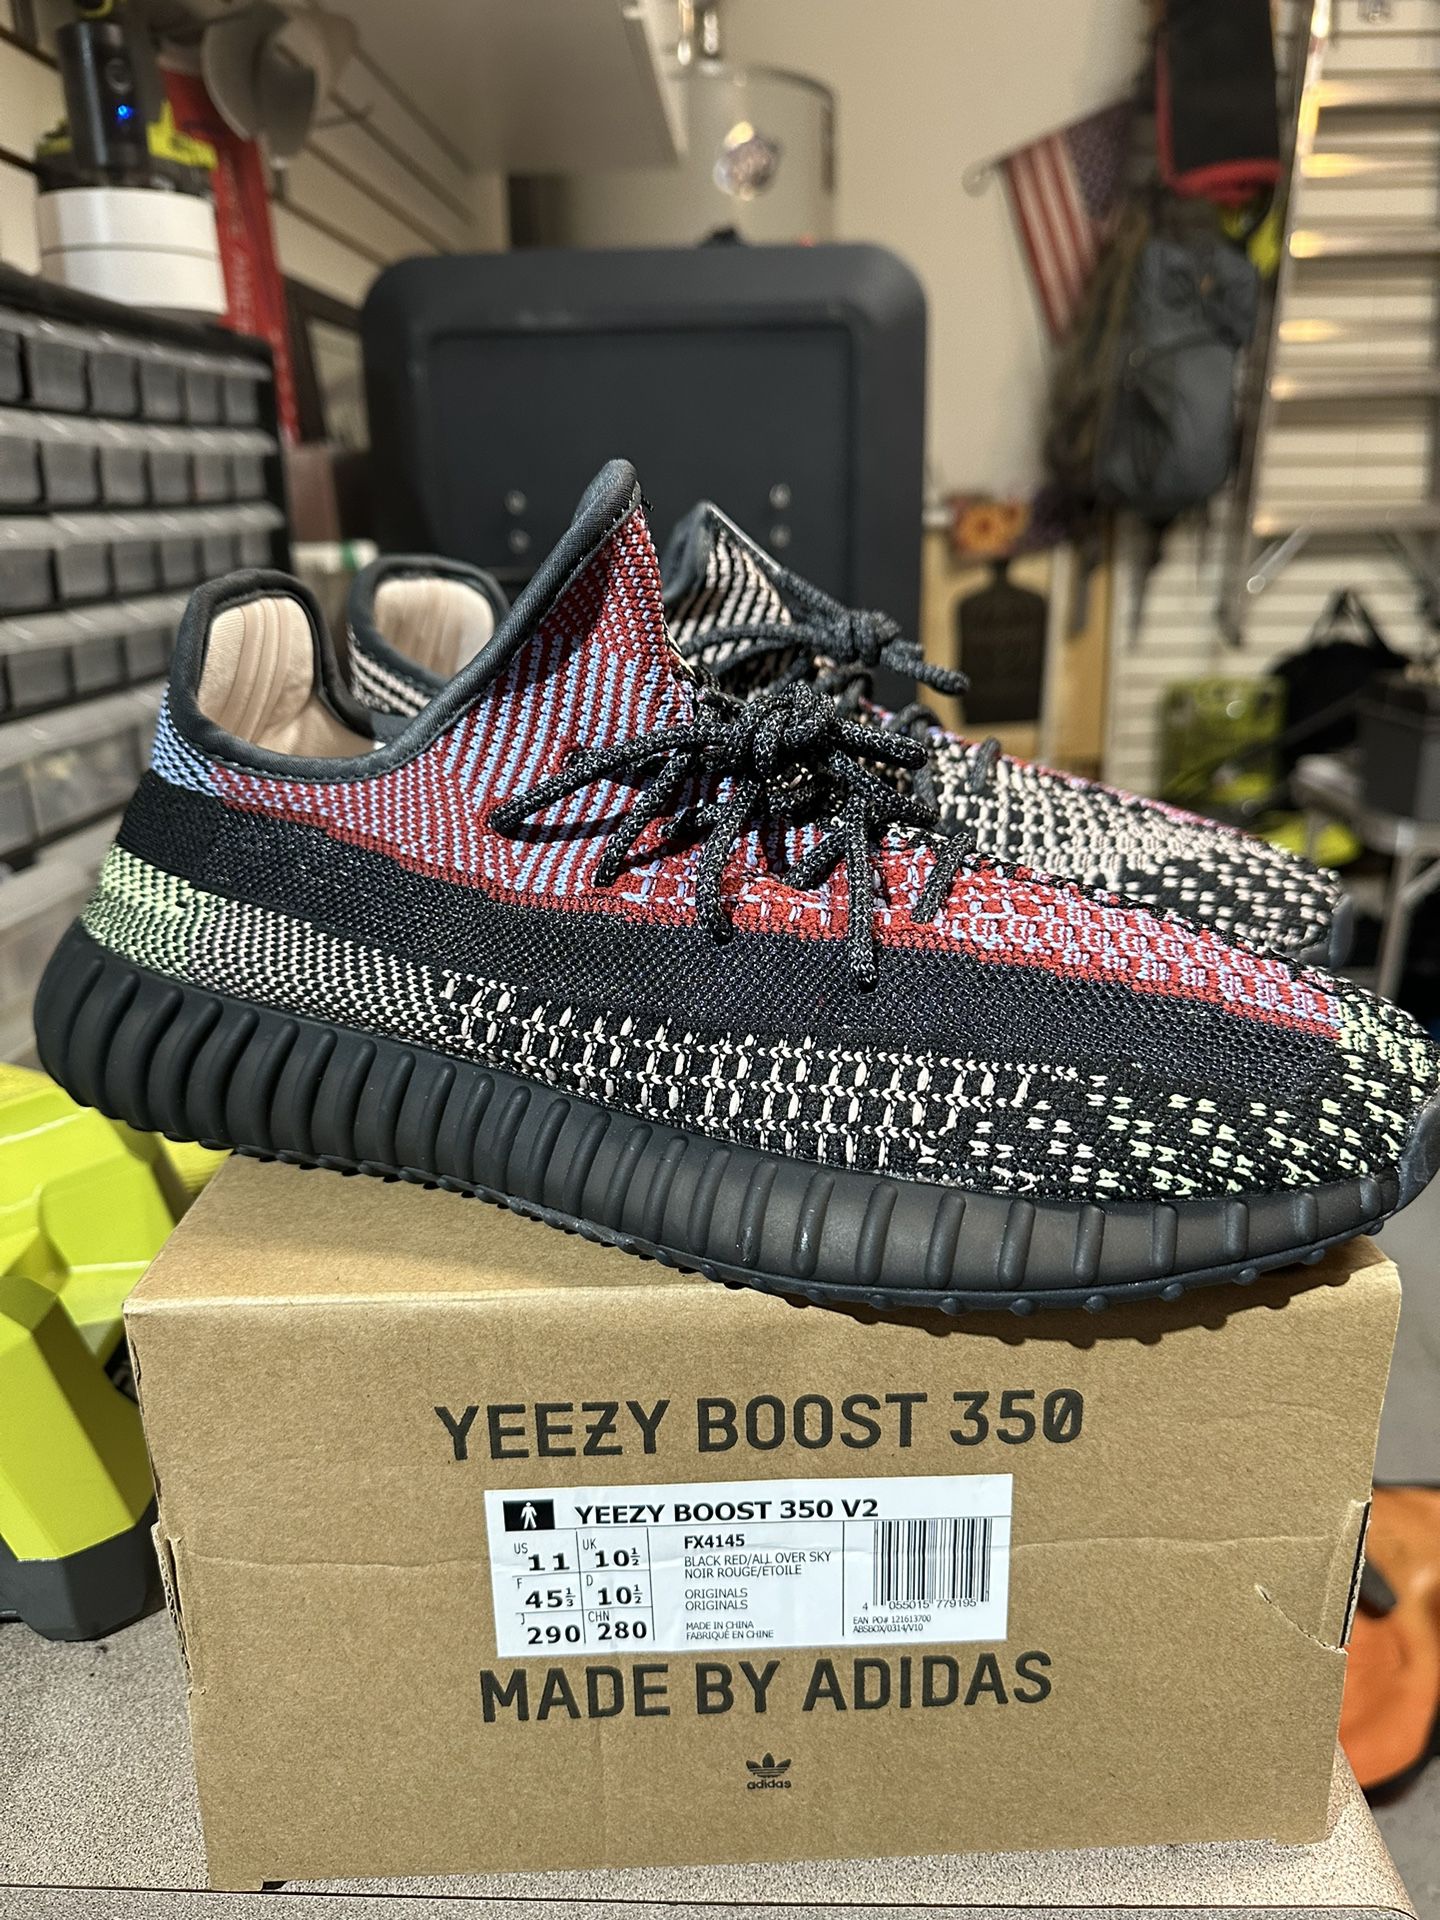 Adidas YEEZY 🔥 Boost 350 V2 YECHEIL BRAND NEW - Different Sizes Available